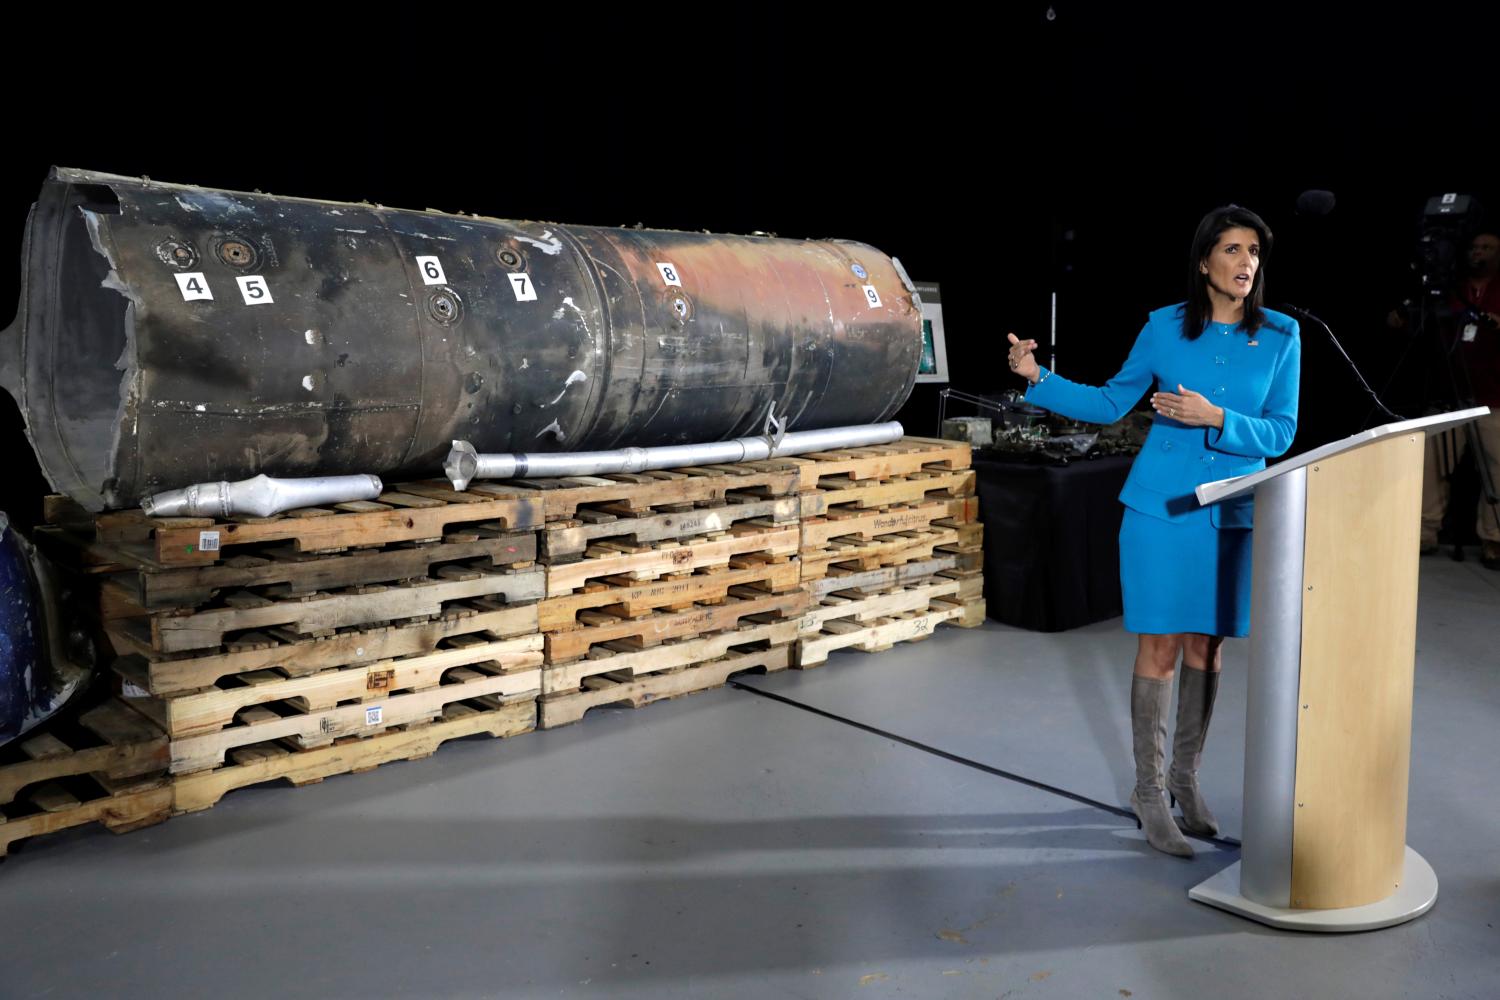 U.S. Ambassador to the United Nations Nikki Haley briefs the media in front of remains of Iranian "Qiam" ballistic missile provided by Pentagon at Joint Base Anacostia-Bolling in Washington, U.S., December 14, 2017. REUTERS/Yuri Gripas - RC1784CD2850